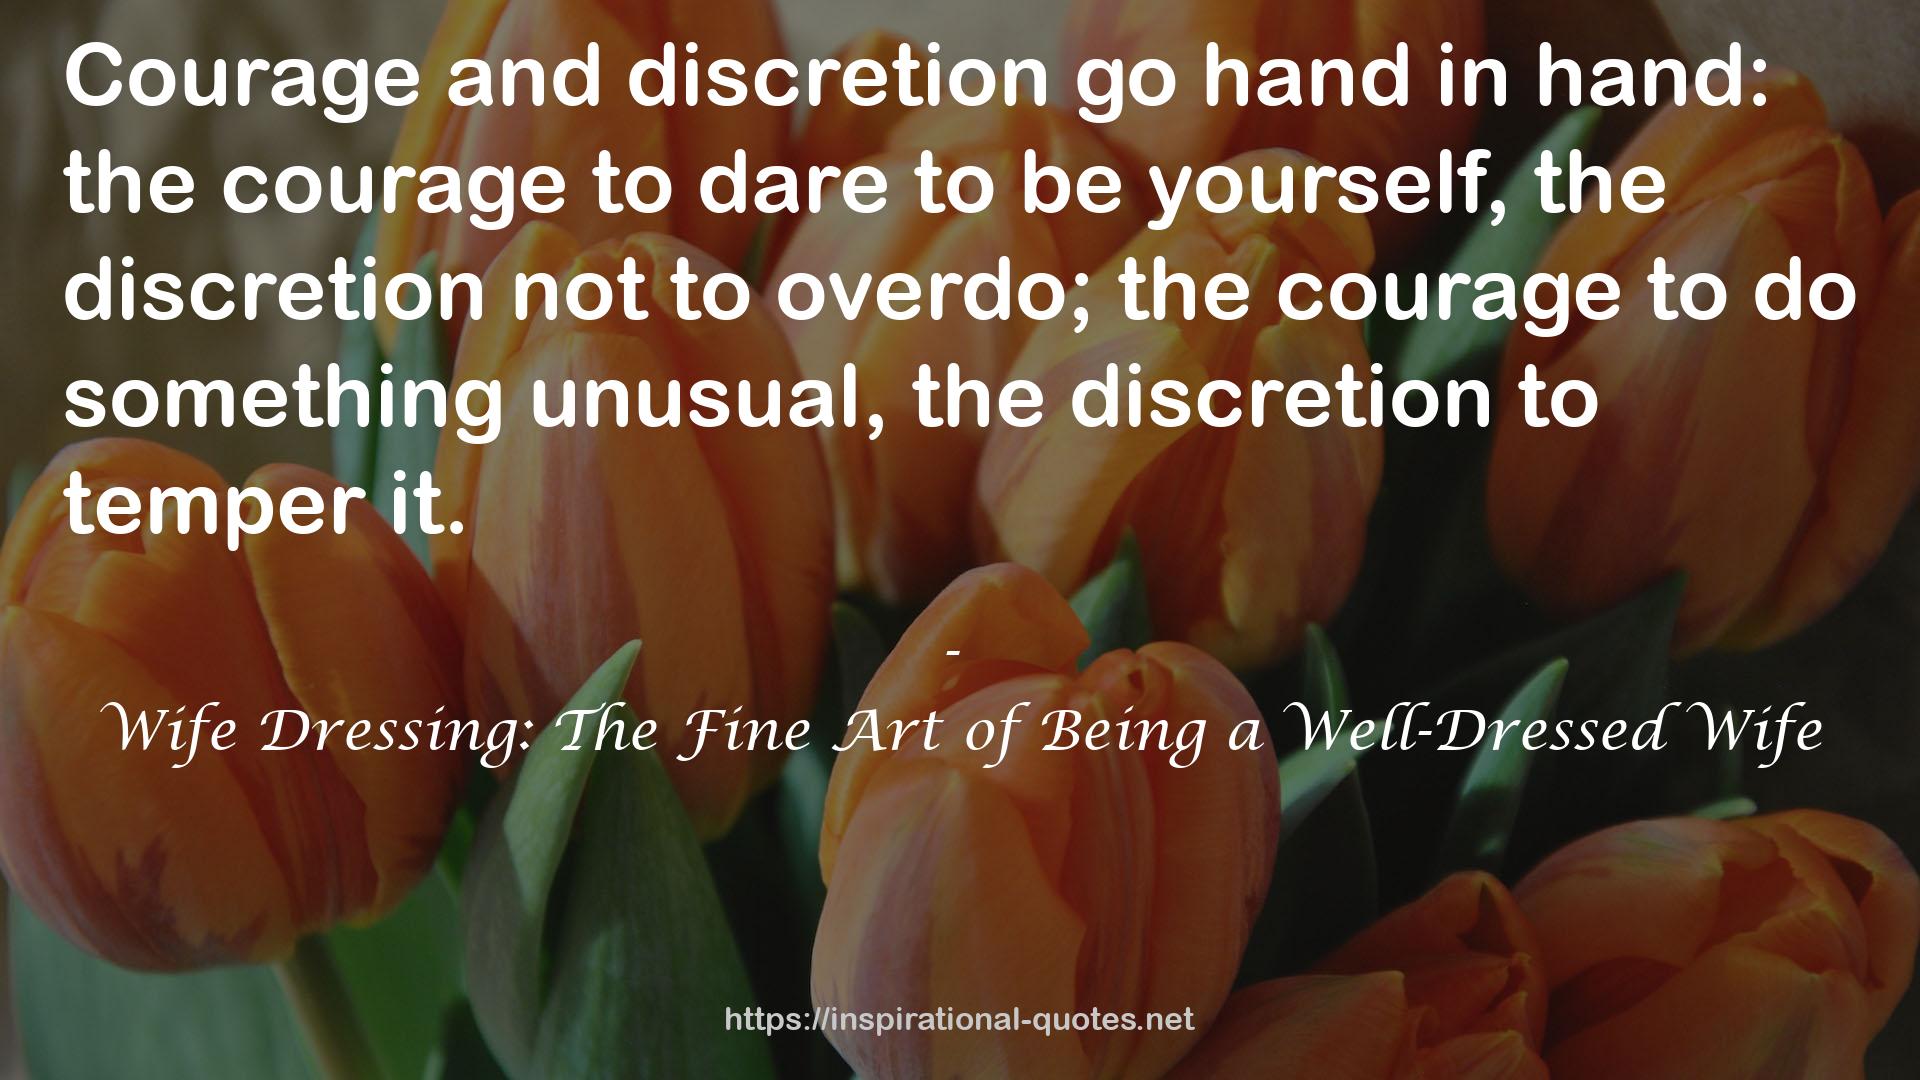 Wife Dressing: The Fine Art of Being a Well-Dressed Wife QUOTES